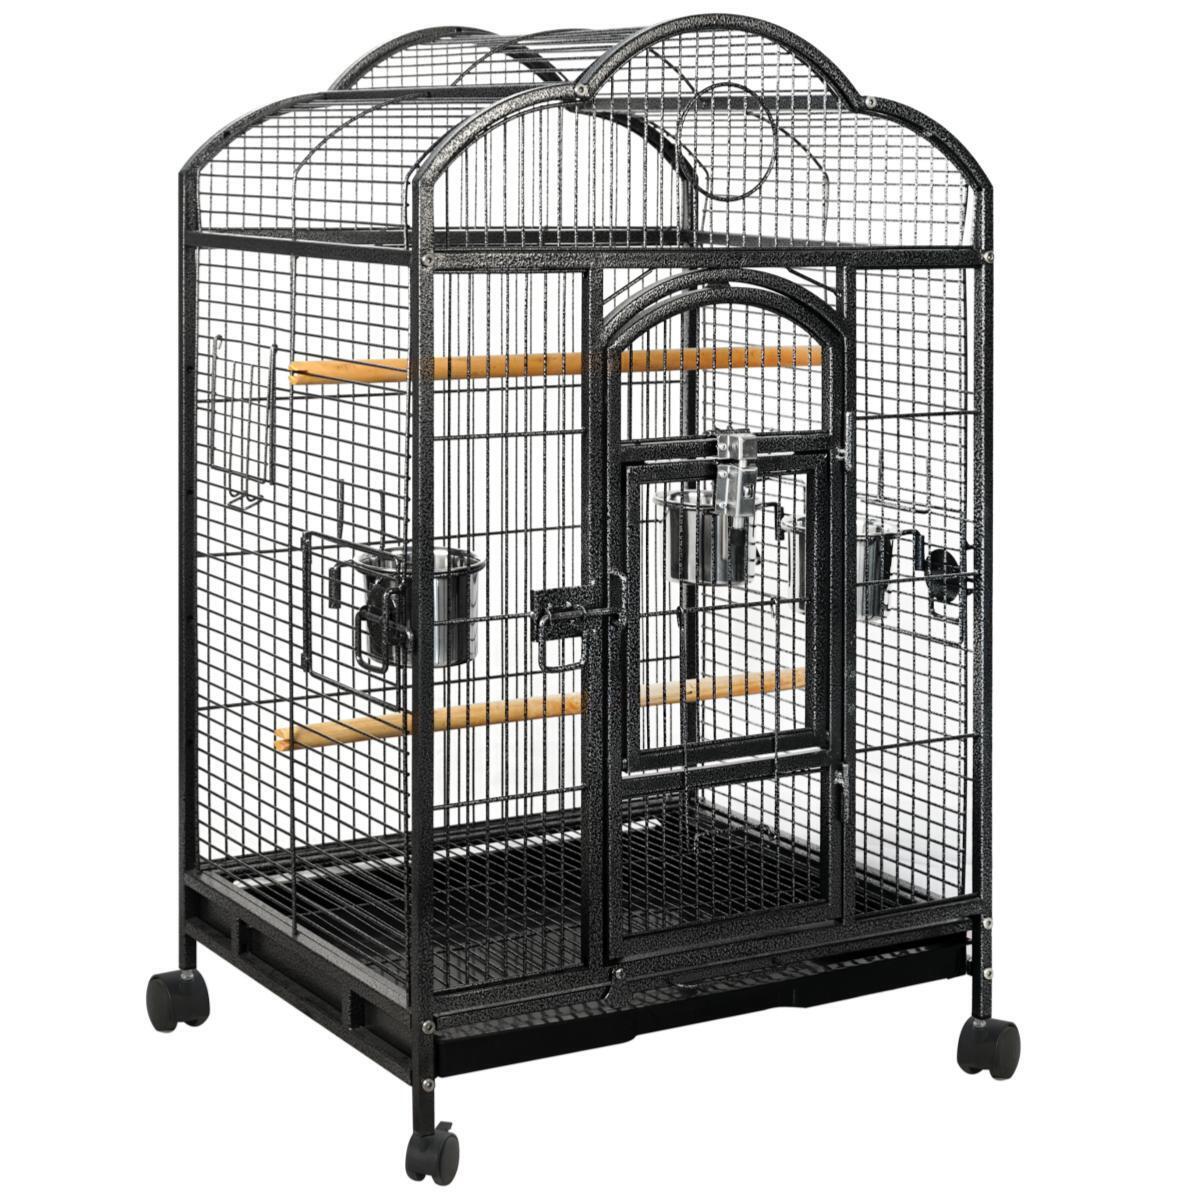 Large Bird Budgie Cage Parrot Aviary Carrier With Wheel